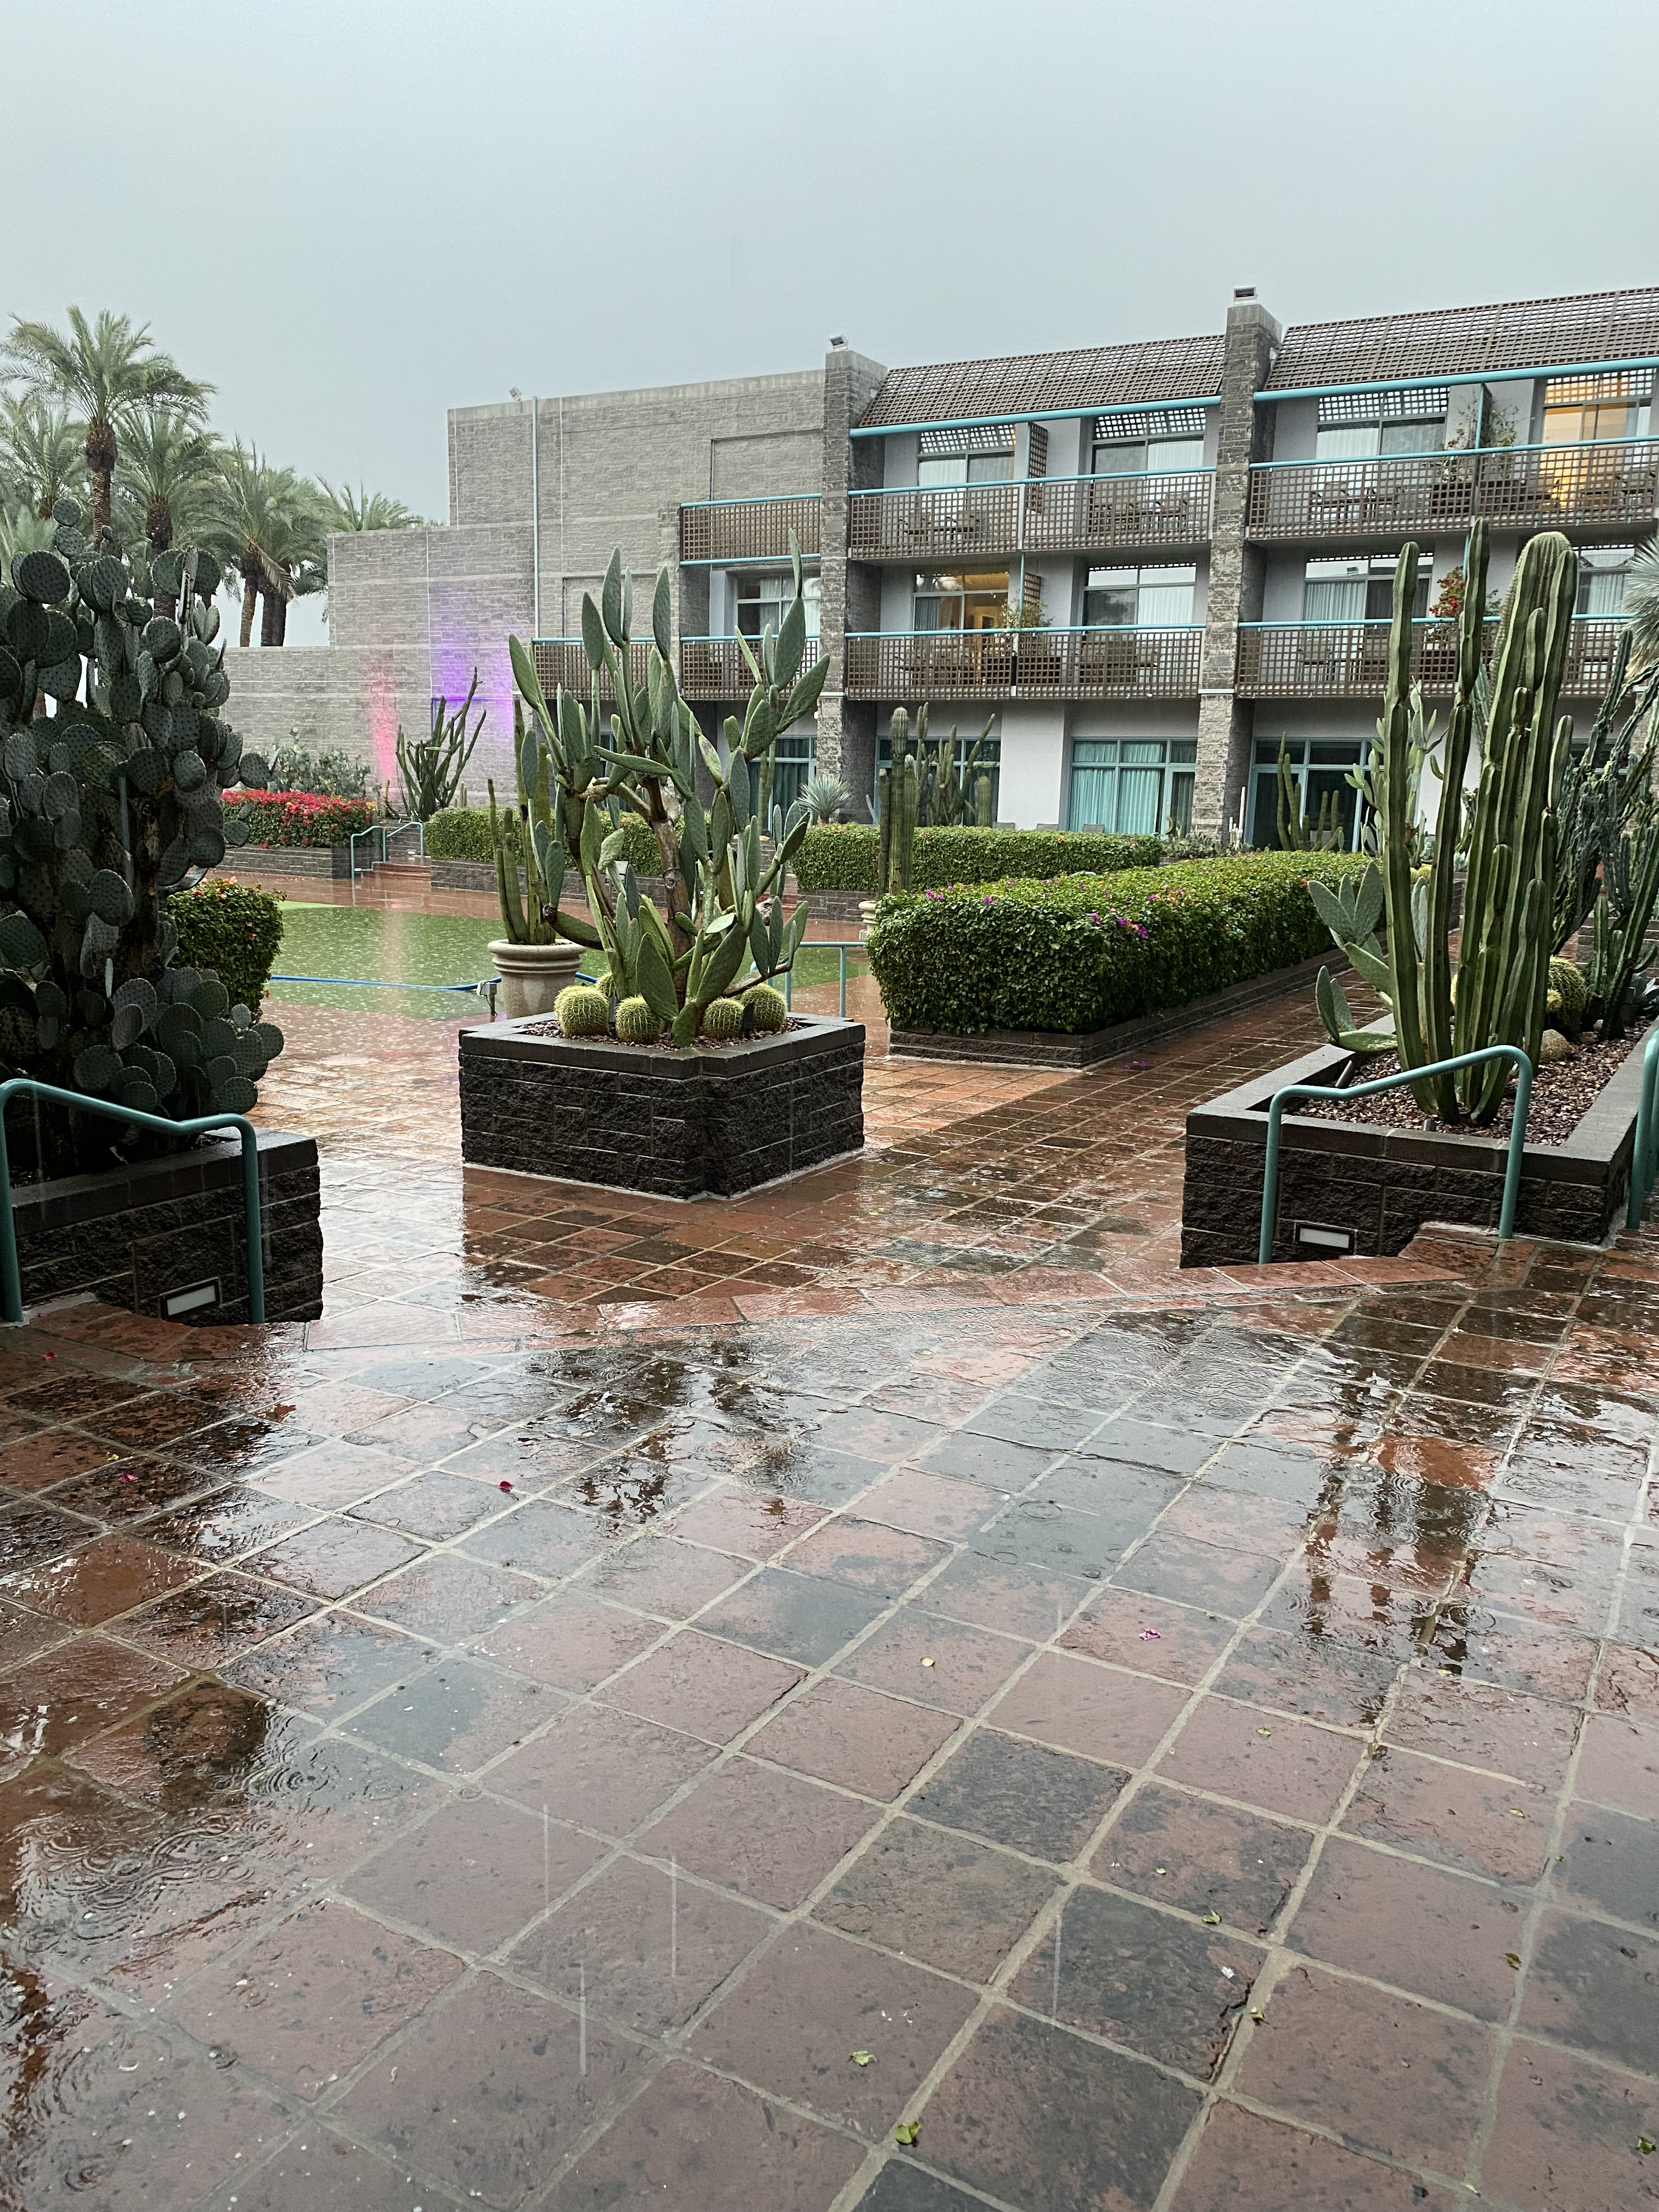 Photo of the outside of our Arizona hotel, where oddly enough it's raining.